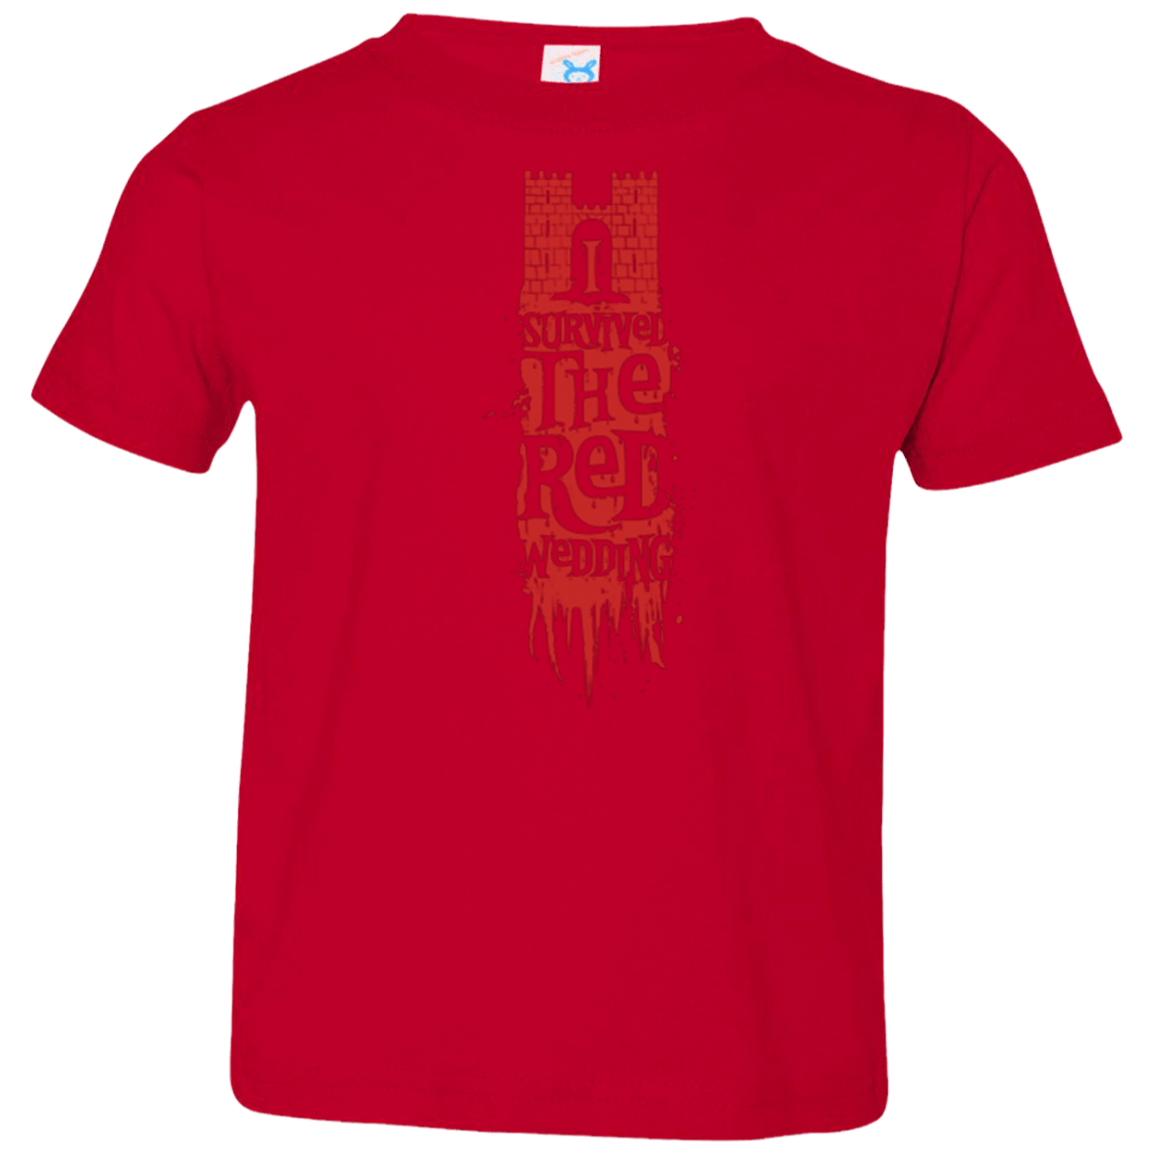 I Survived the Red Wedding Toddler Premium T-Shirt